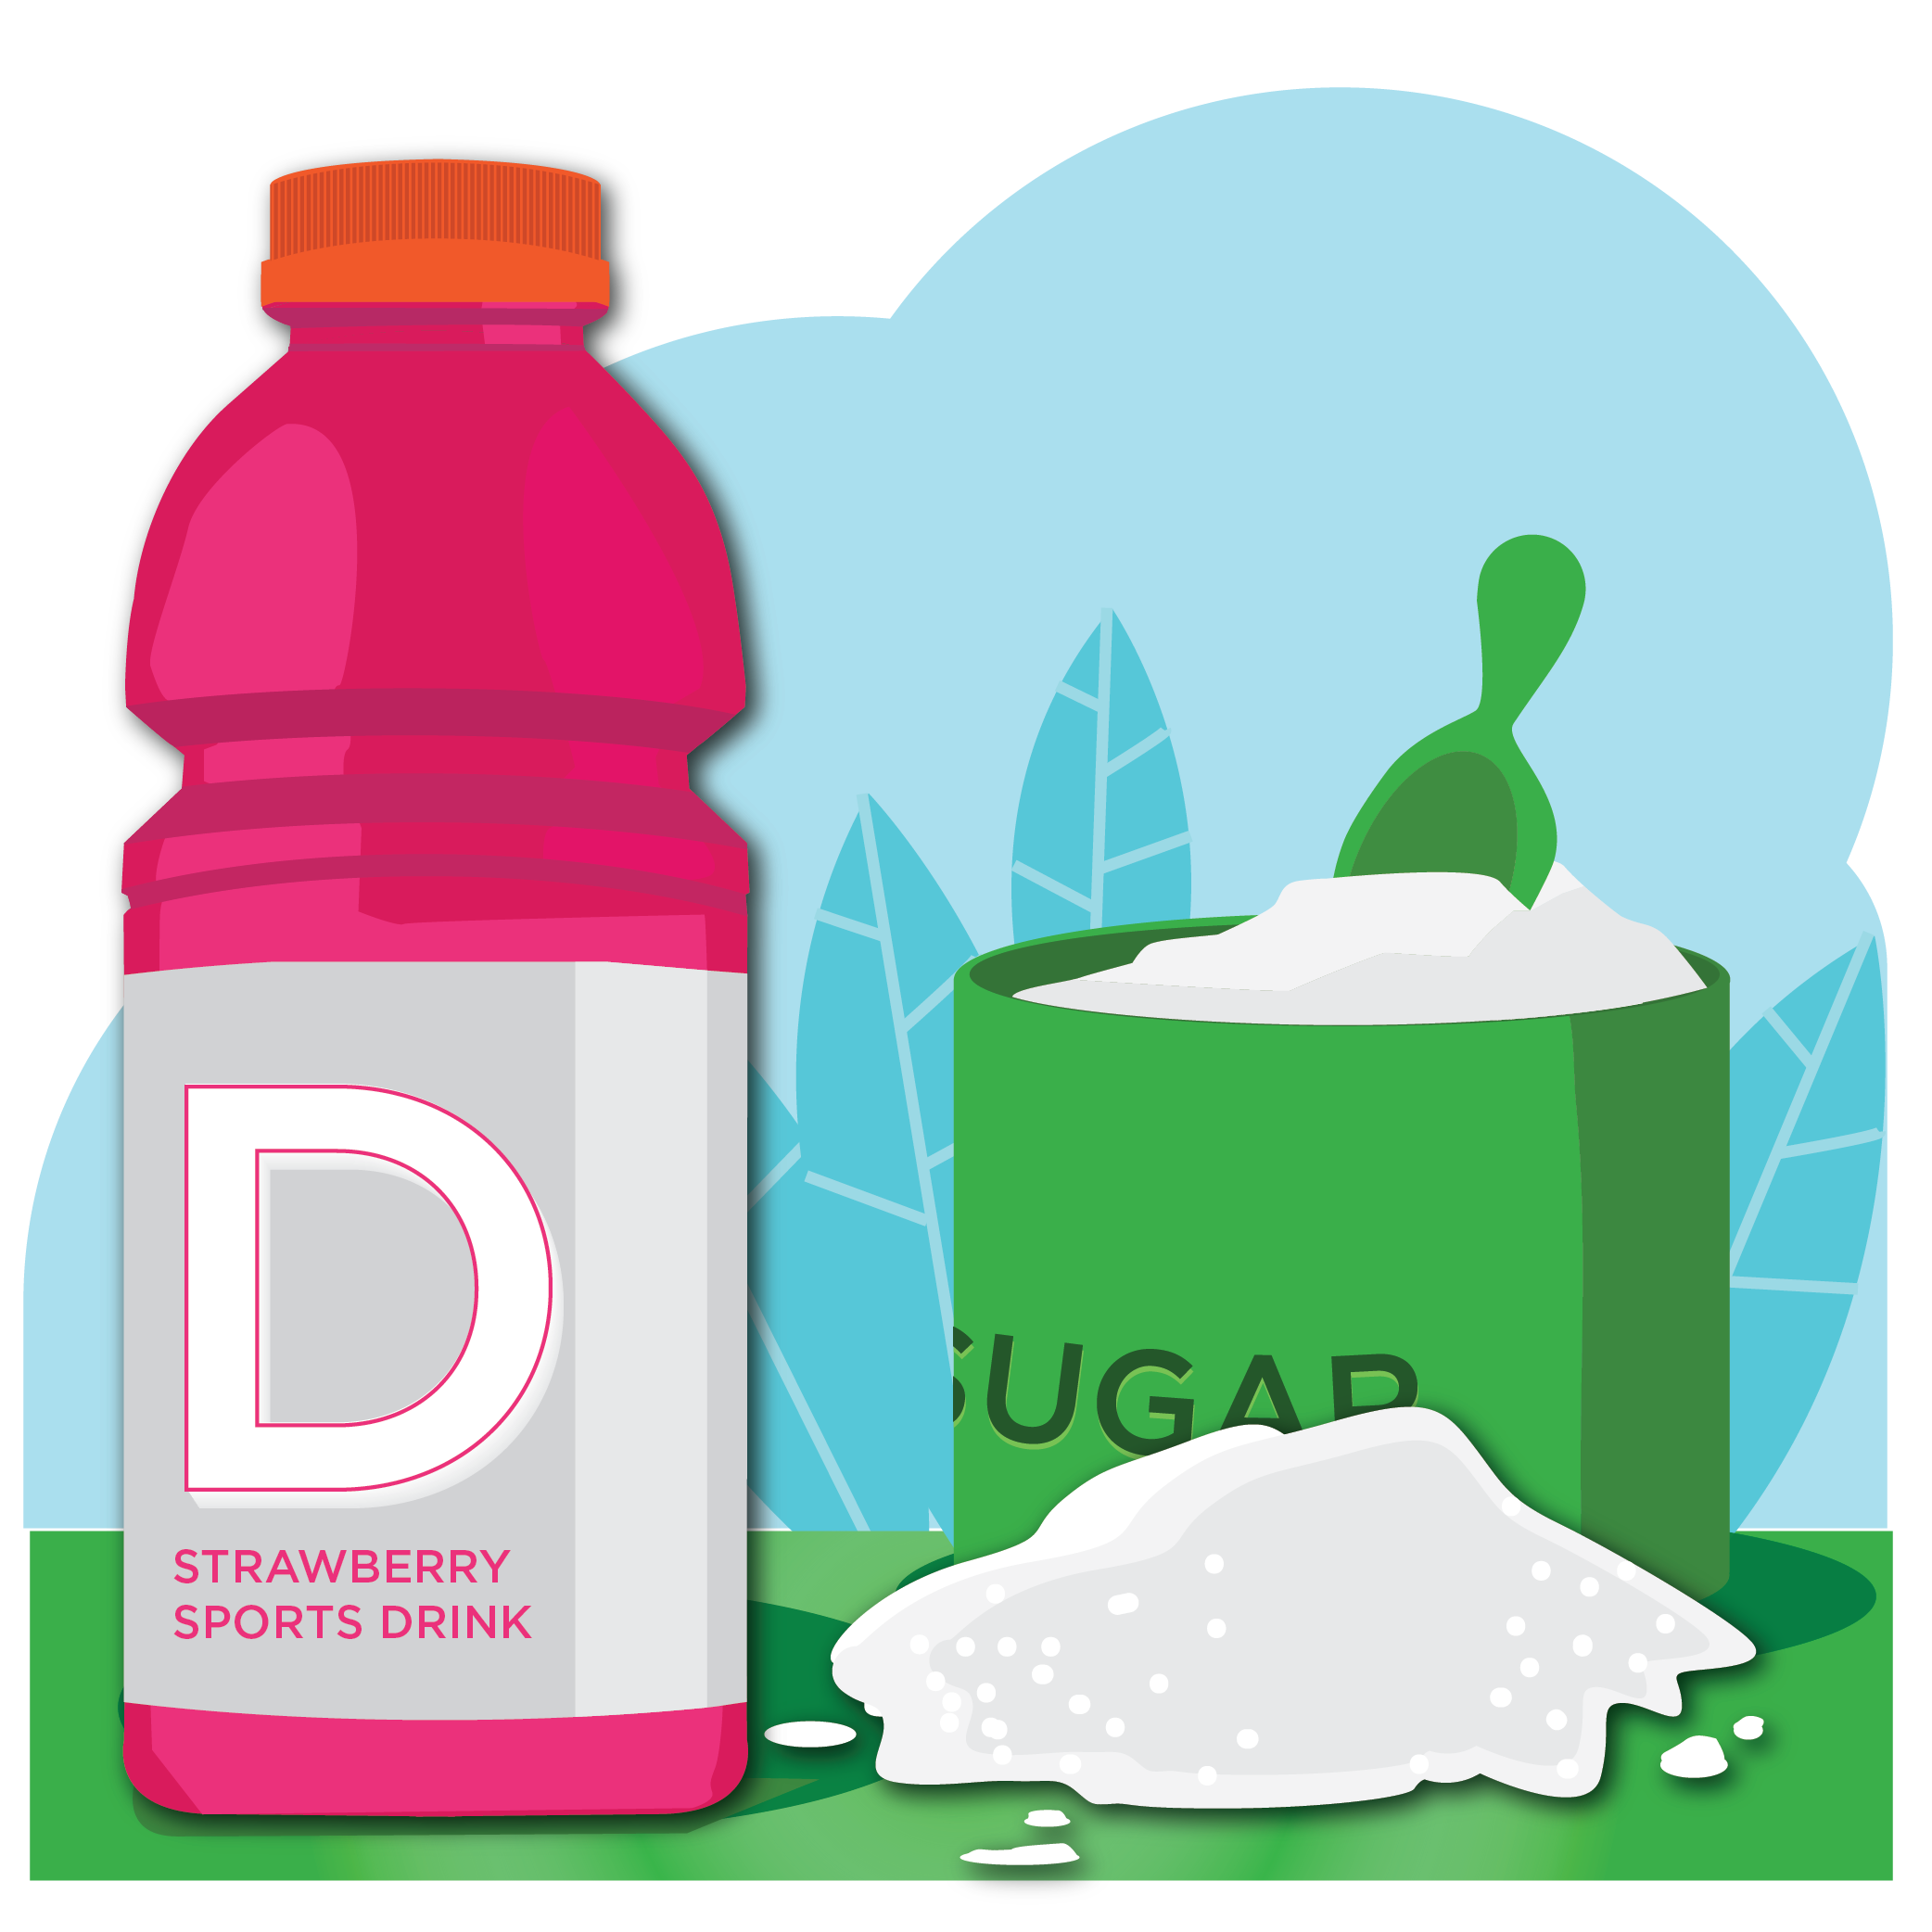 Illustration of sports drink bottle and sugar jar to emphasize the high sugar content